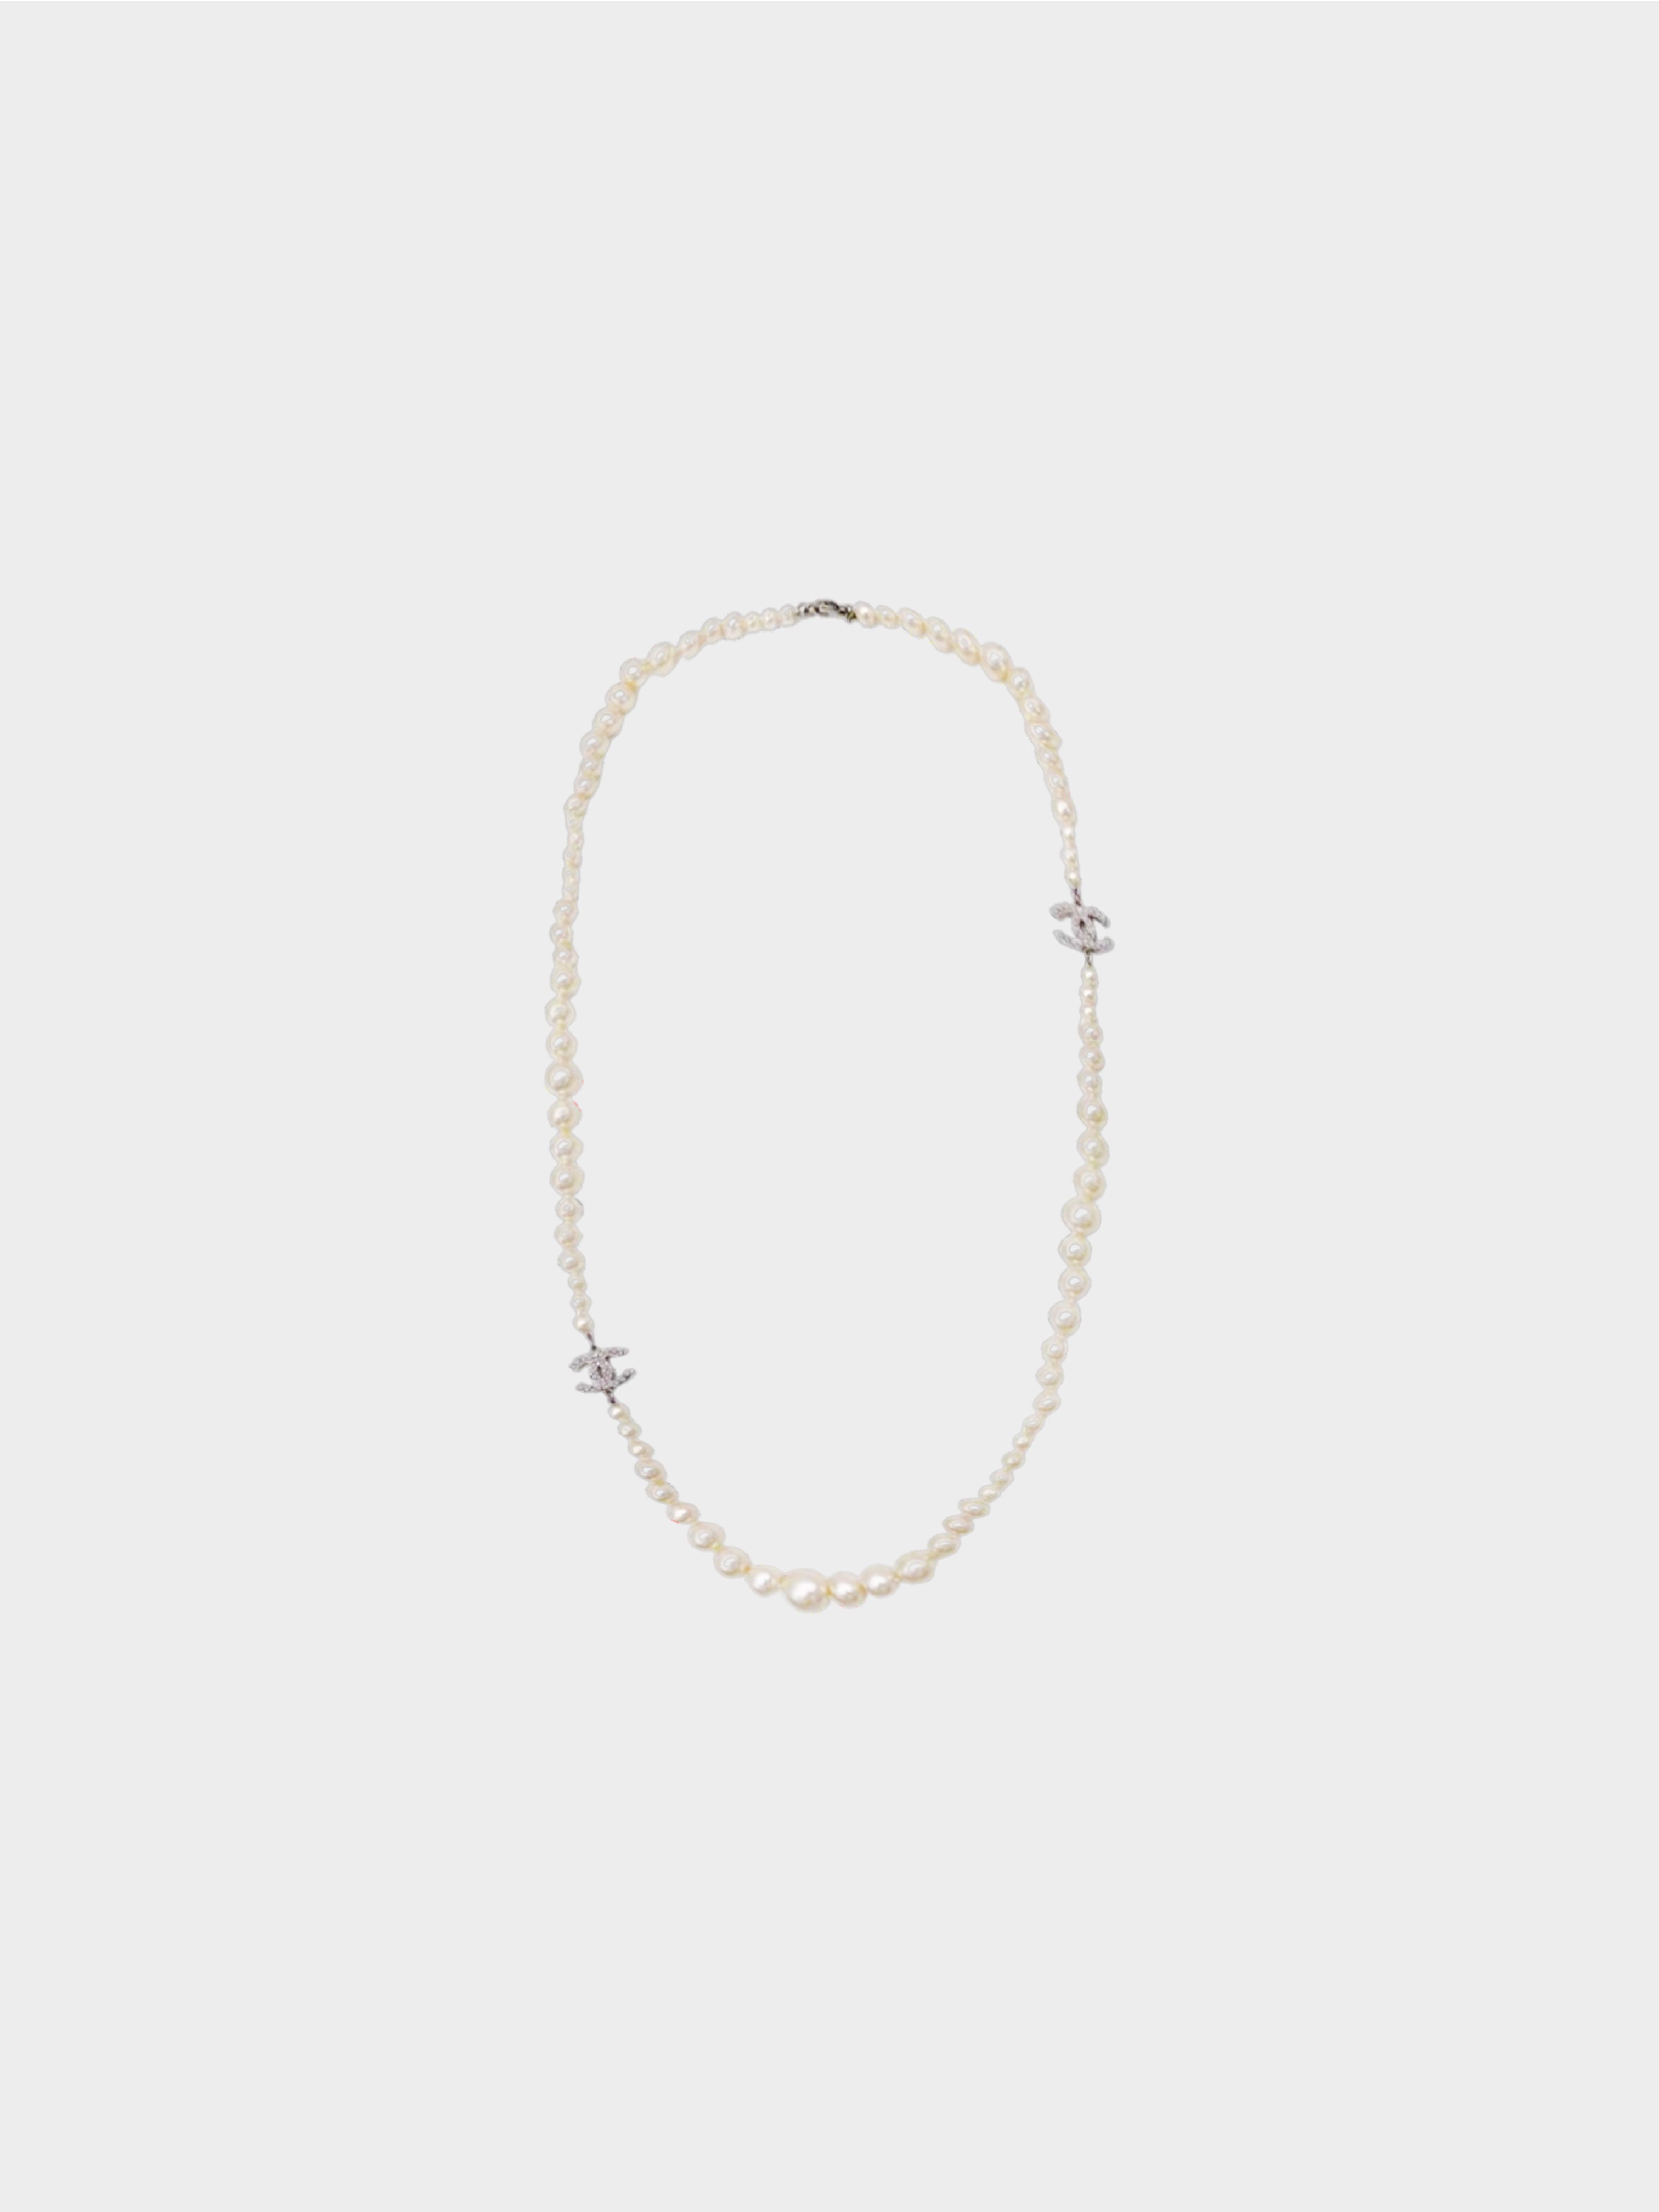 FAUX PEARL AND CRYSTAL LONG CHAIN NECKLACE, CHANEL